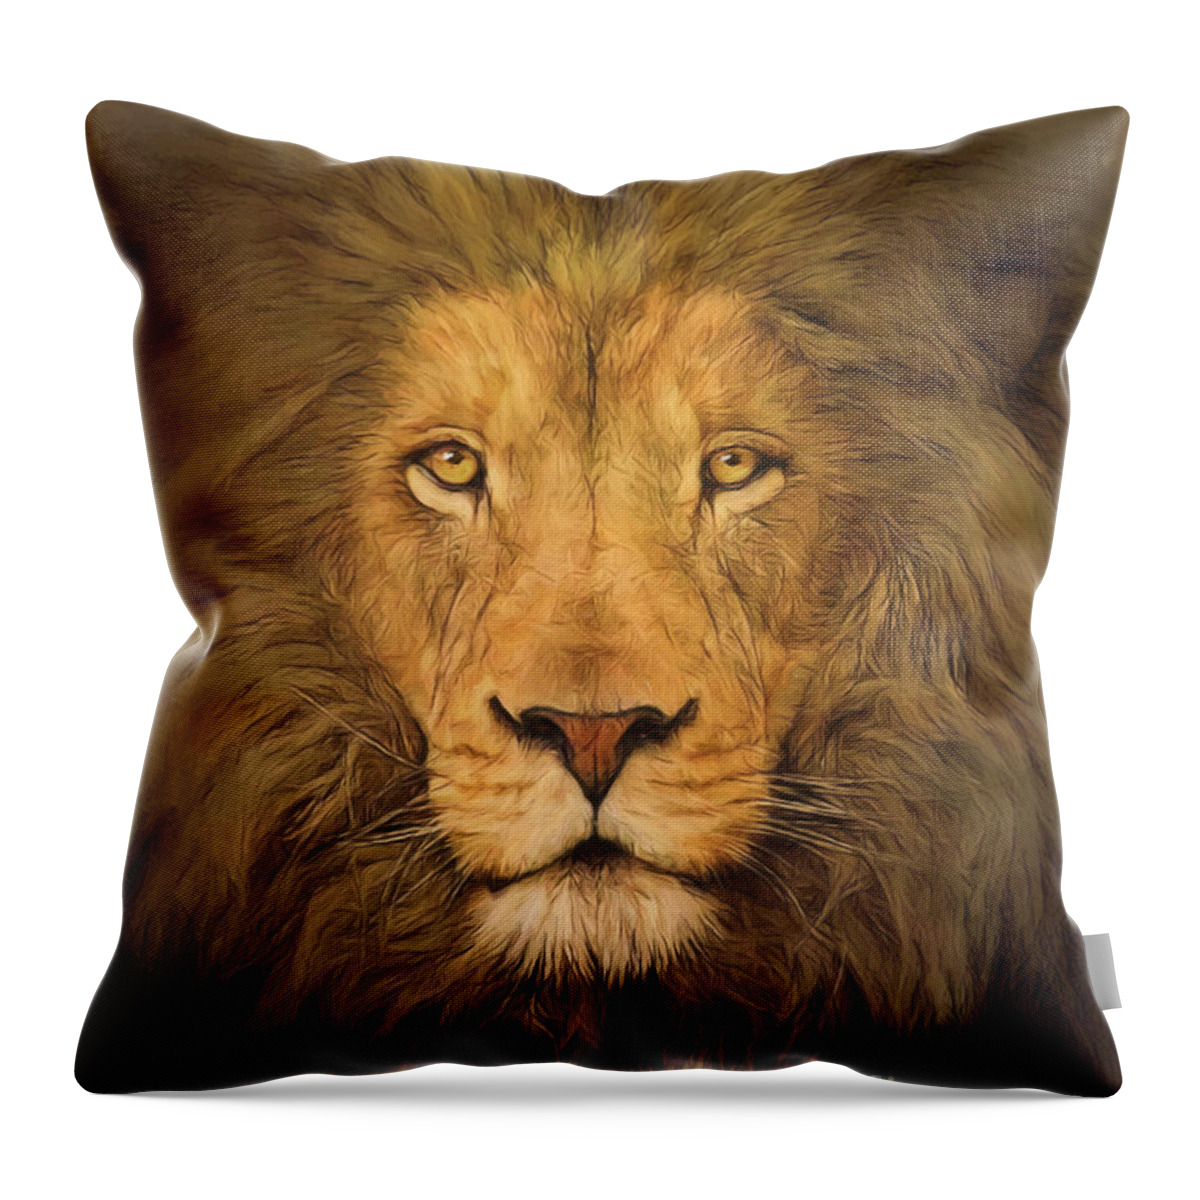 Lion Throw Pillow featuring the digital art Lion by Tim Wemple